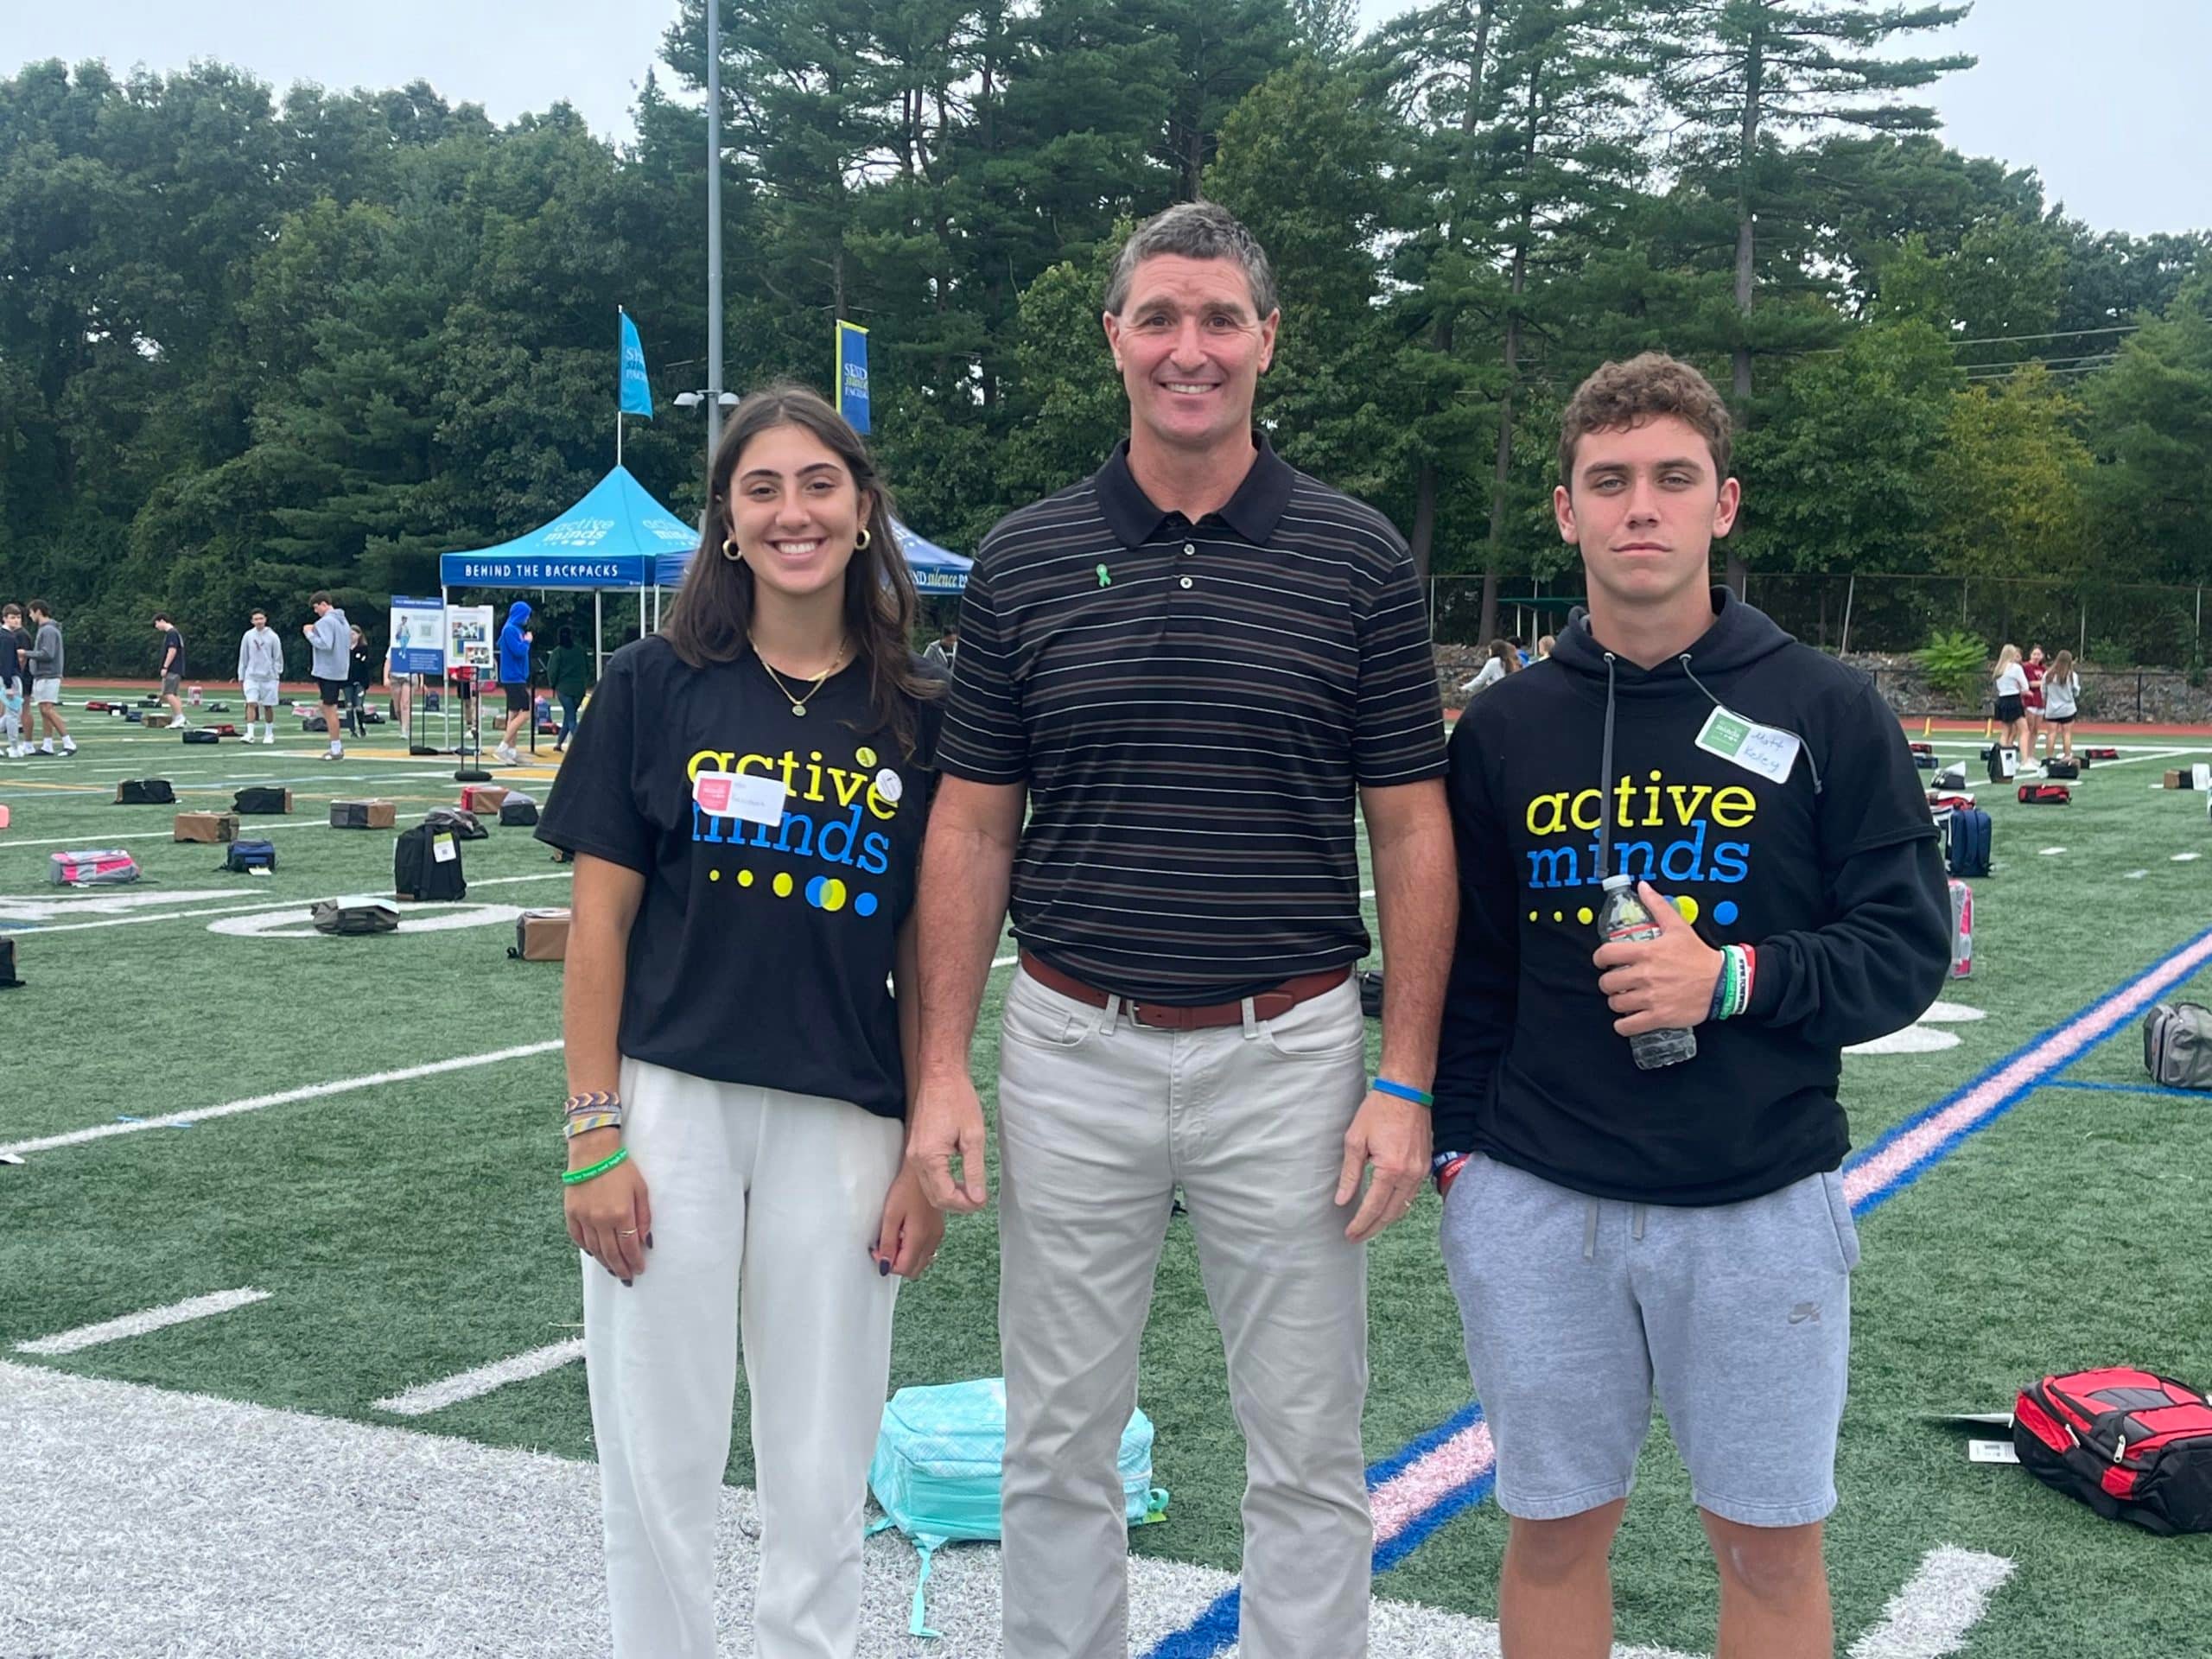 From left: North Attleboro Active Minds President Melanie Simonian, Co-Founder of the KyleCares Foundation Jim Johnson, and King Philip Active Minds President Matt Kelley. (Photo courtesy King Philip Regional School District)